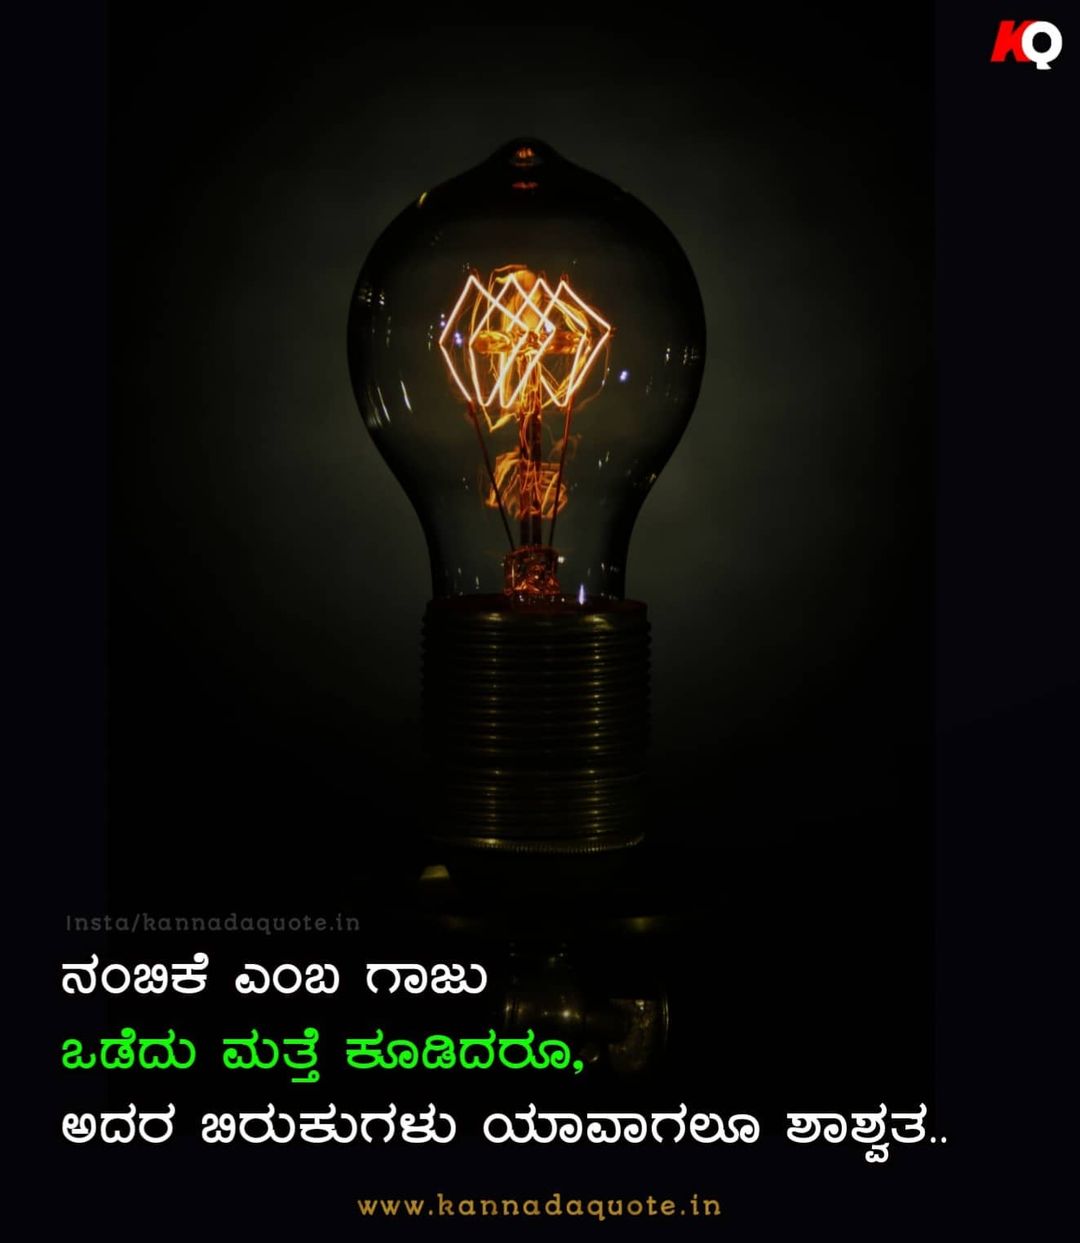 Meaningful nambike quotes in kannada